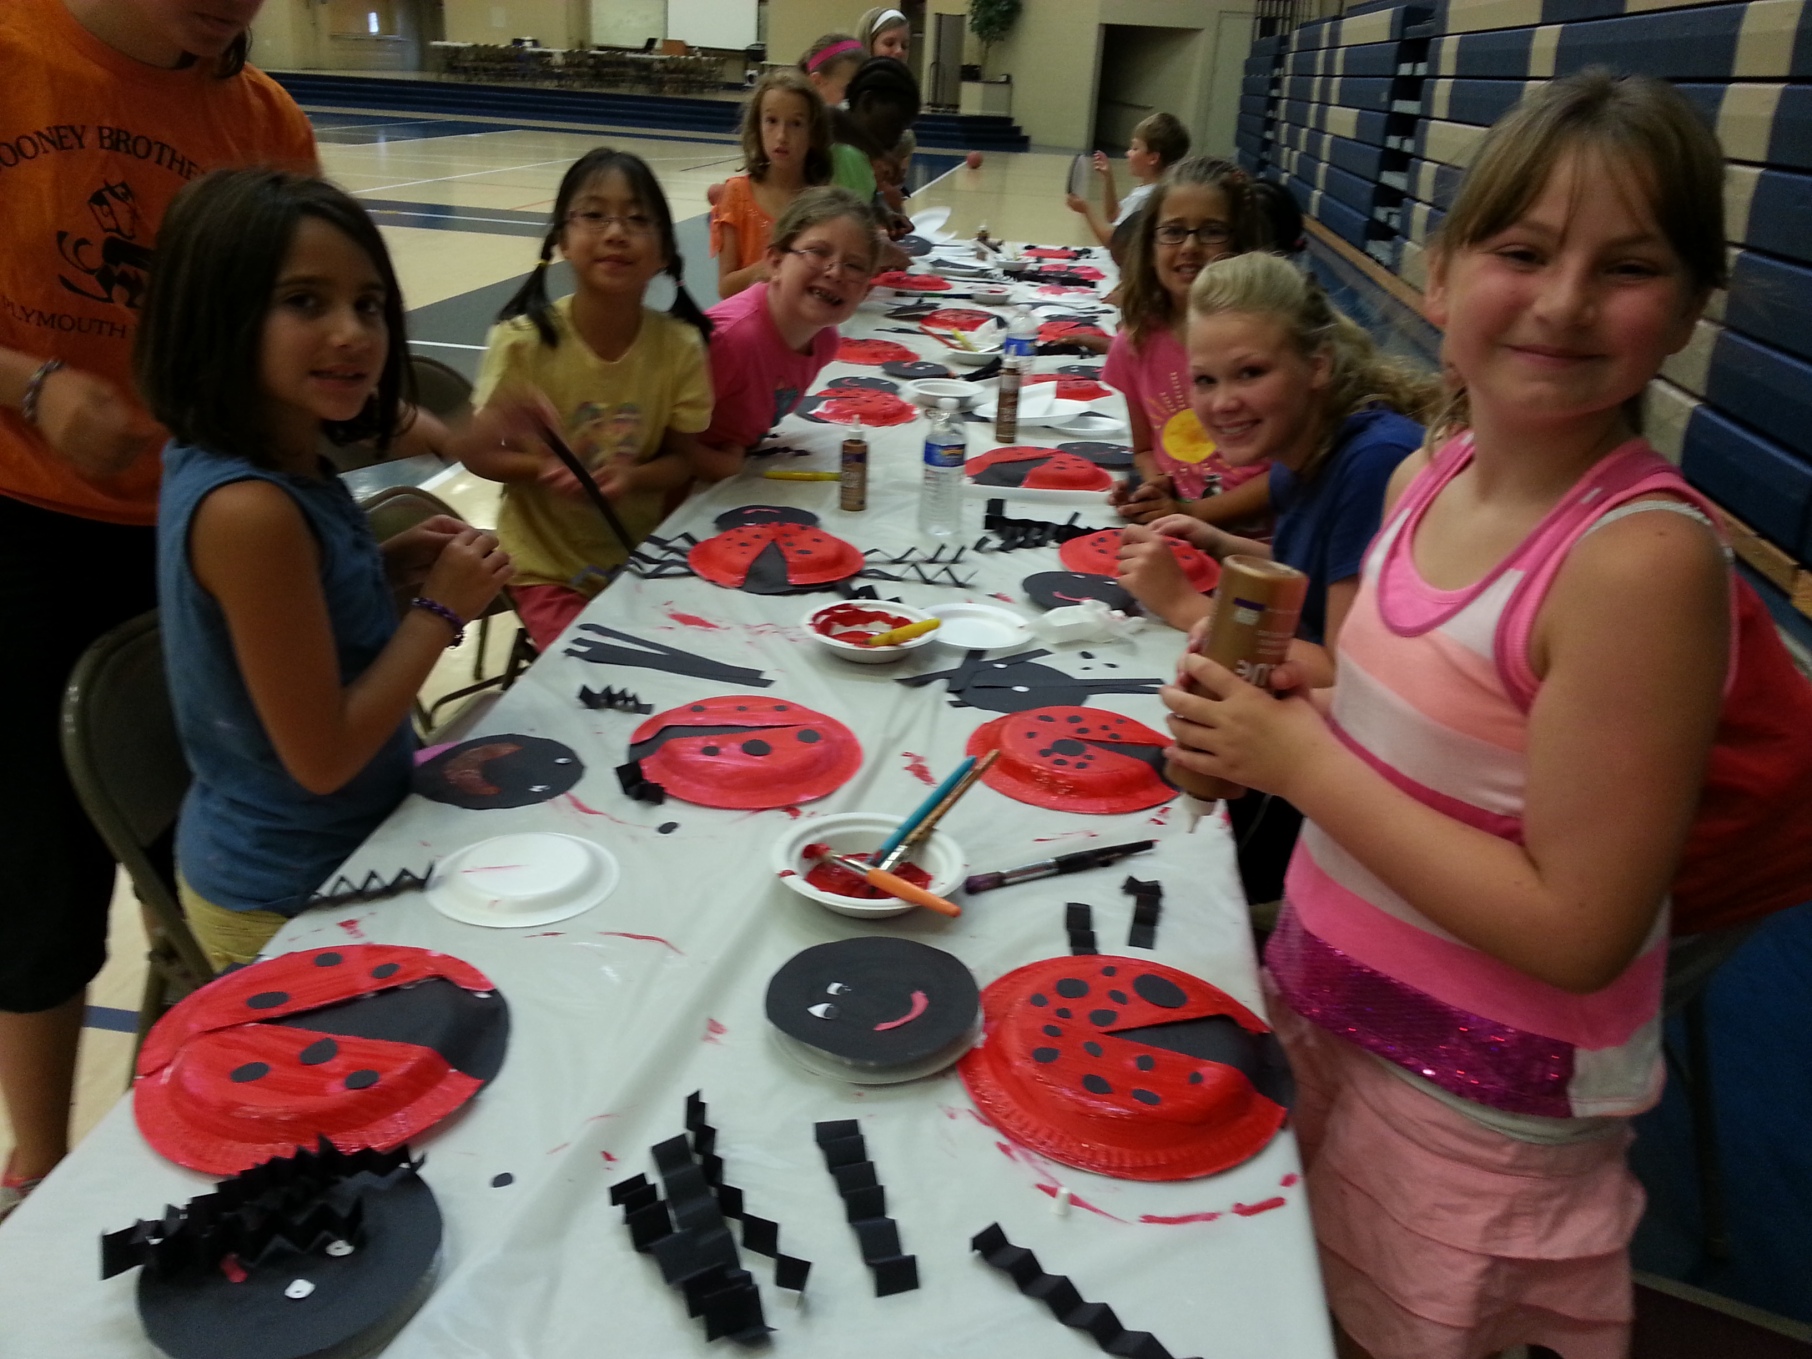 20130724_114730 « Valley Forge Day Camp